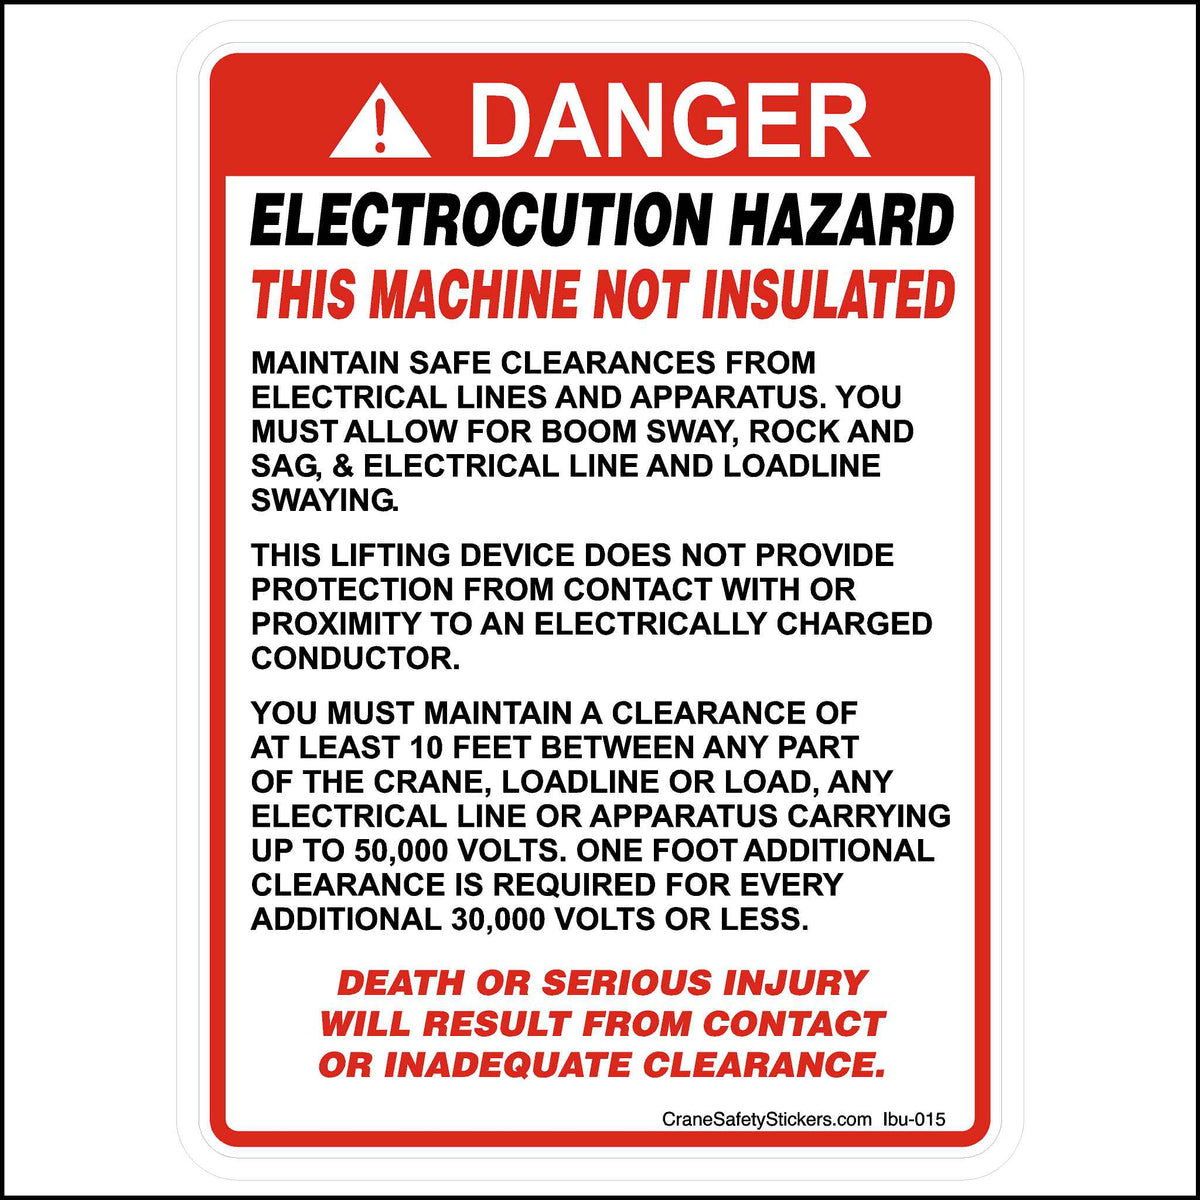 Safe Clearances From Electrical Lines Boom Sway Rock and Sag Sticker is Printed With. DANGER! ELECTROCUTION HAZARD THIS MACHINE NOT INSULATED MAINTAIN SAFE CLEARANCES FROM ELECTRICAL LINES AND APPARATUS. YOU MUST ALLOW FOR BOOM SWAY, ROCK, AND SAG, &amp; ELECTRICAL LINE AND LOADLINE SWAYING. THIS LIFTING DEVICE DOES NOT PROVIDE PROTECTION FROM CONTACT WITH OR PROXIMITY TO AN ELECTRICALLY CHARGED CONDUCTOR. YOU MUST MAINTAIN A CLEARANCE OF AT LEAST 10 FEET BETWEEN ANY PART OF THE CRANE, LOADLINE OR LOAD.